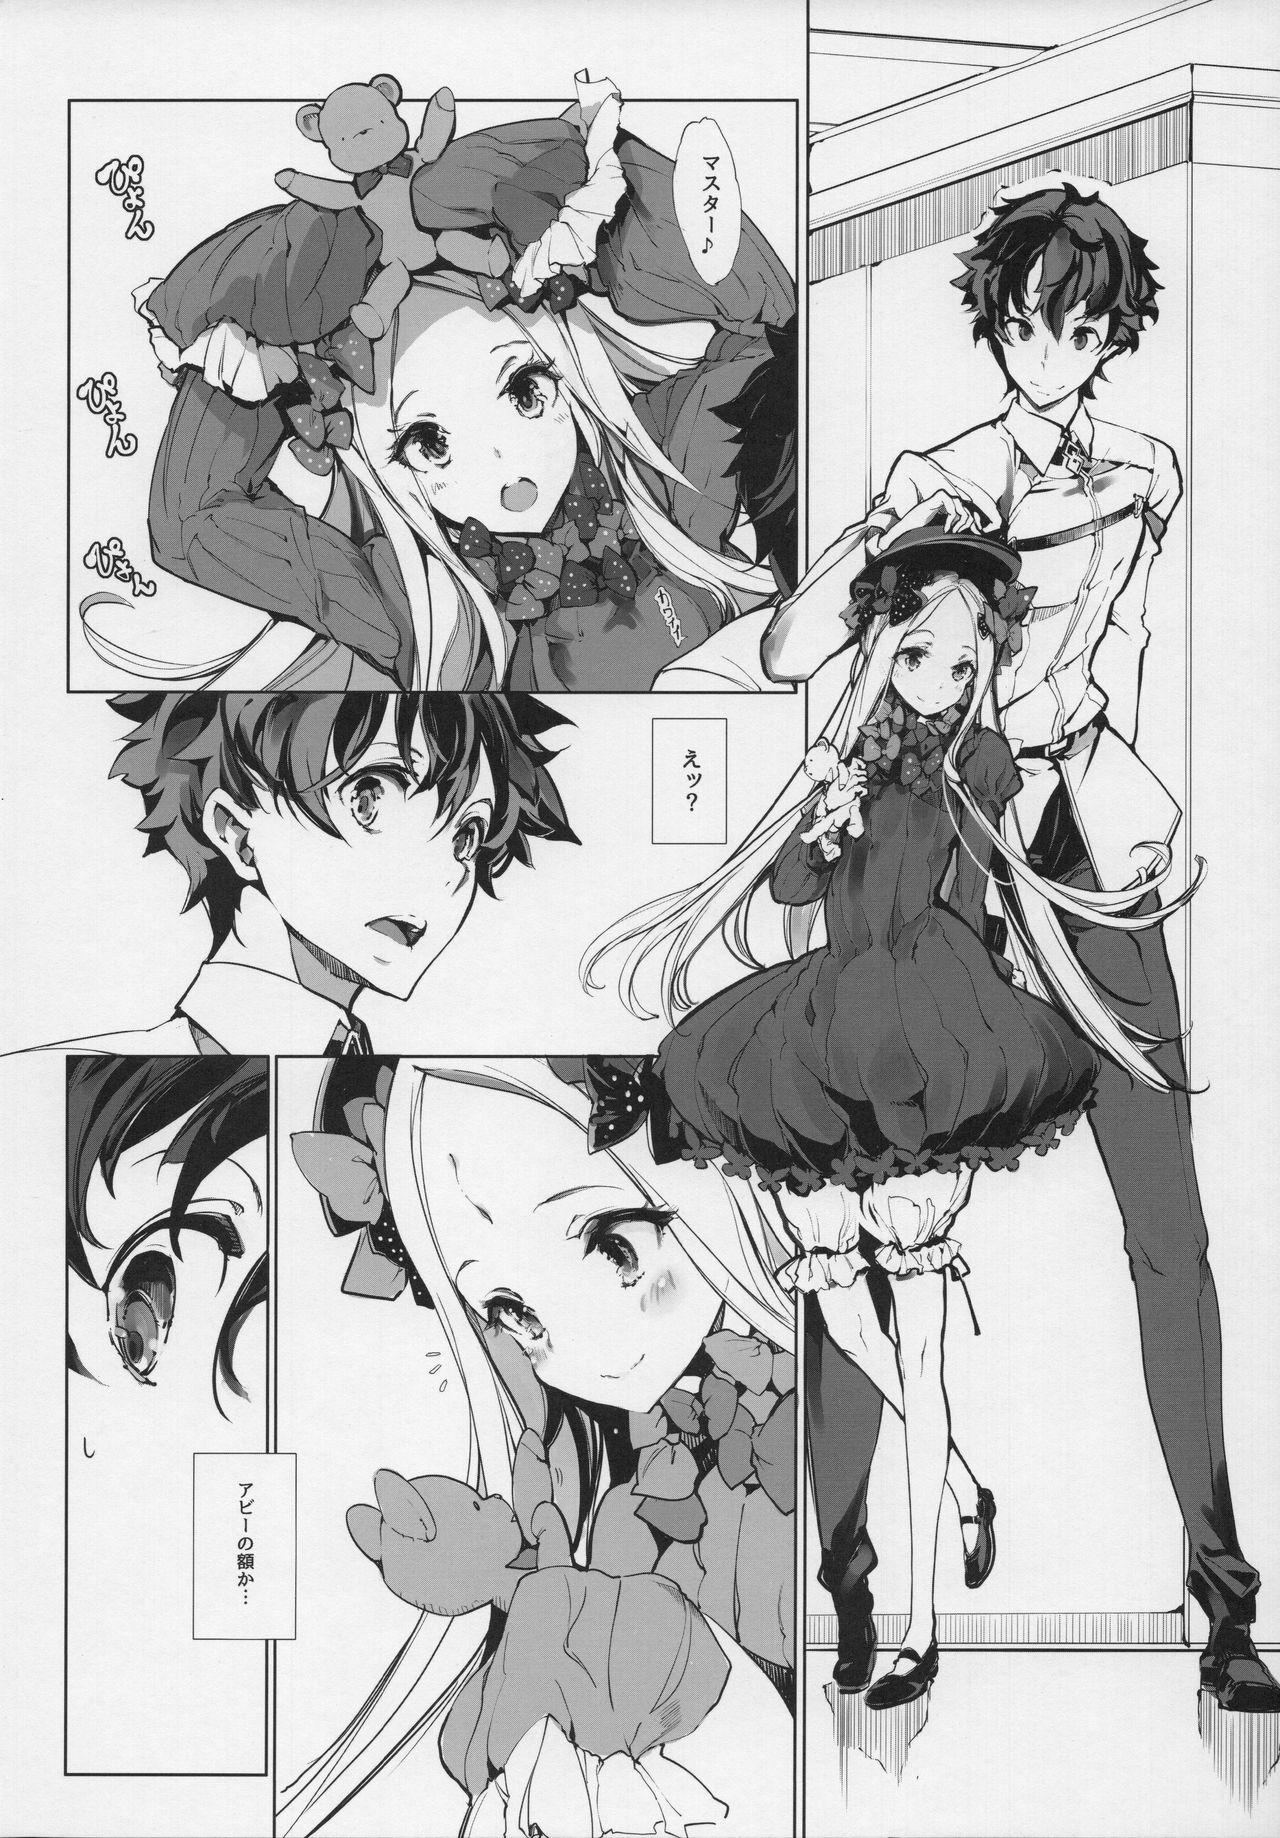 Real Amatuer Porn Sen no Ko o Haramu Mori no Shoujo - The girl of the woods with a thousand young - Fate grand order Ball Sucking - Page 3